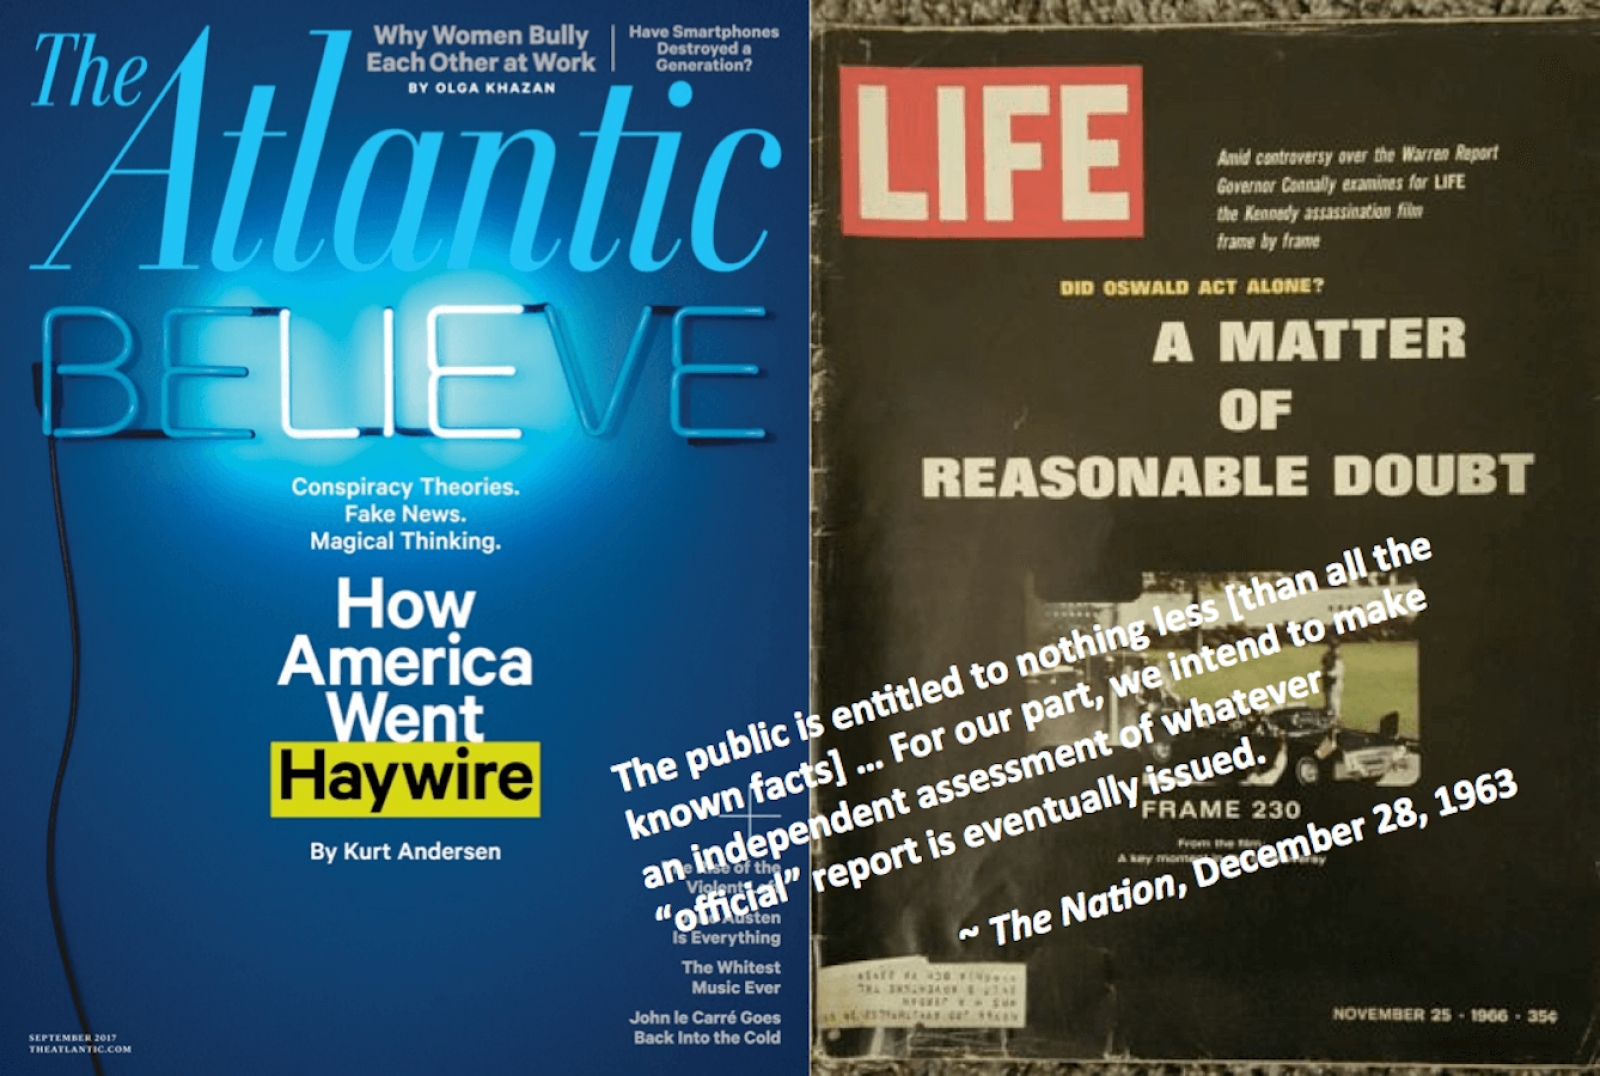 How The Atlantic Monthly and Kurt Andersen Went Haywire